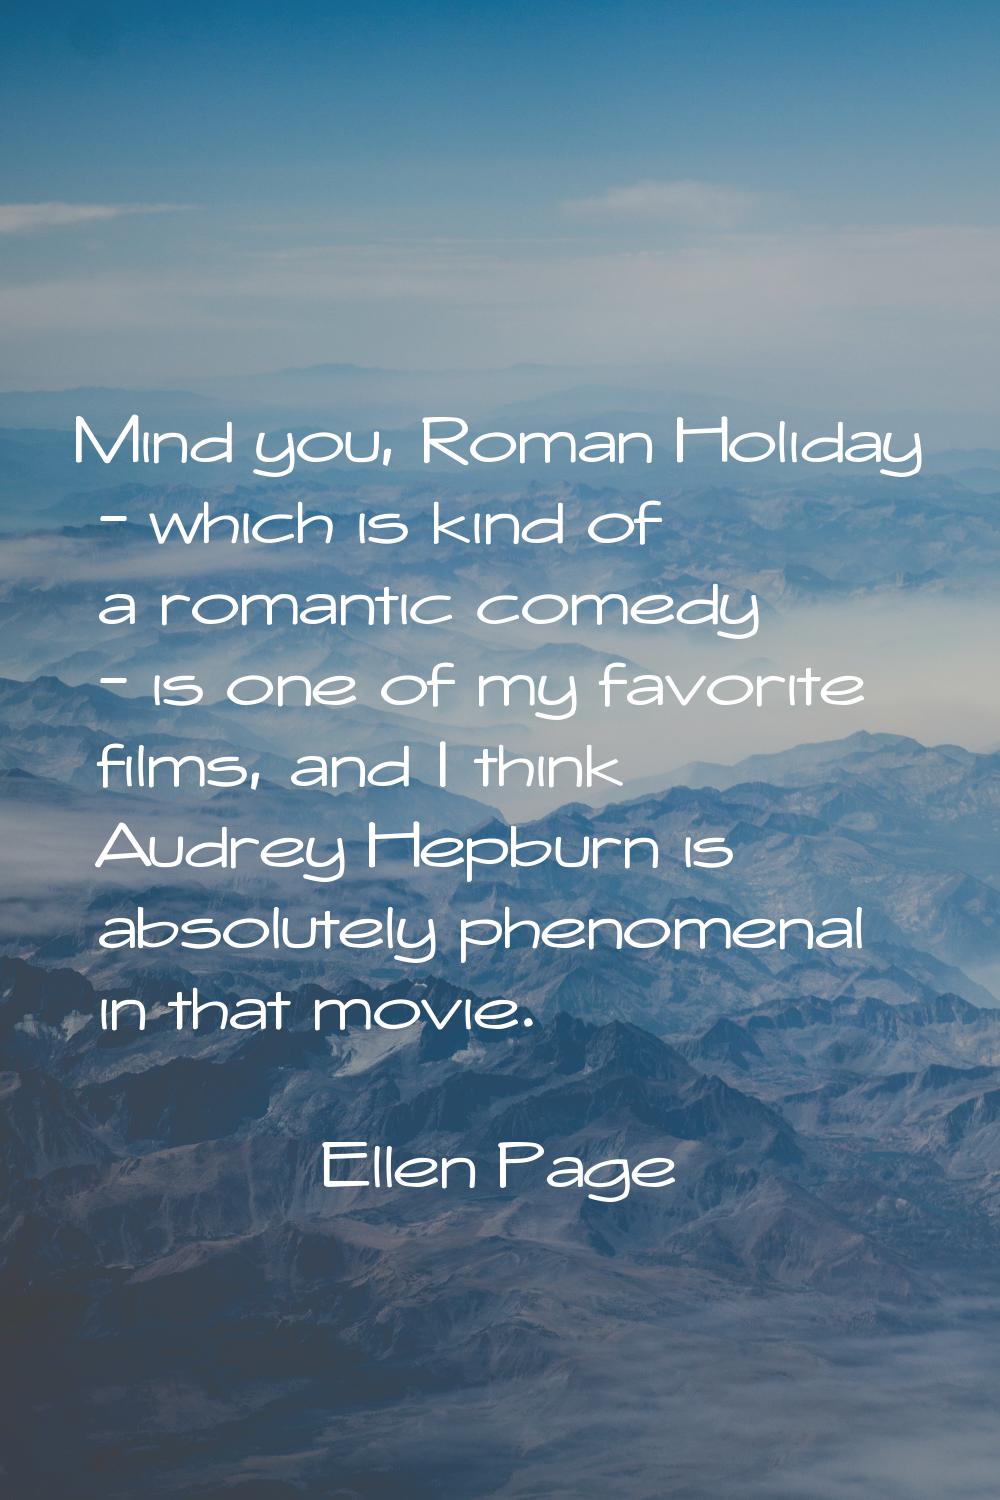 Mind you, Roman Holiday - which is kind of a romantic comedy - is one of my favorite films, and I t